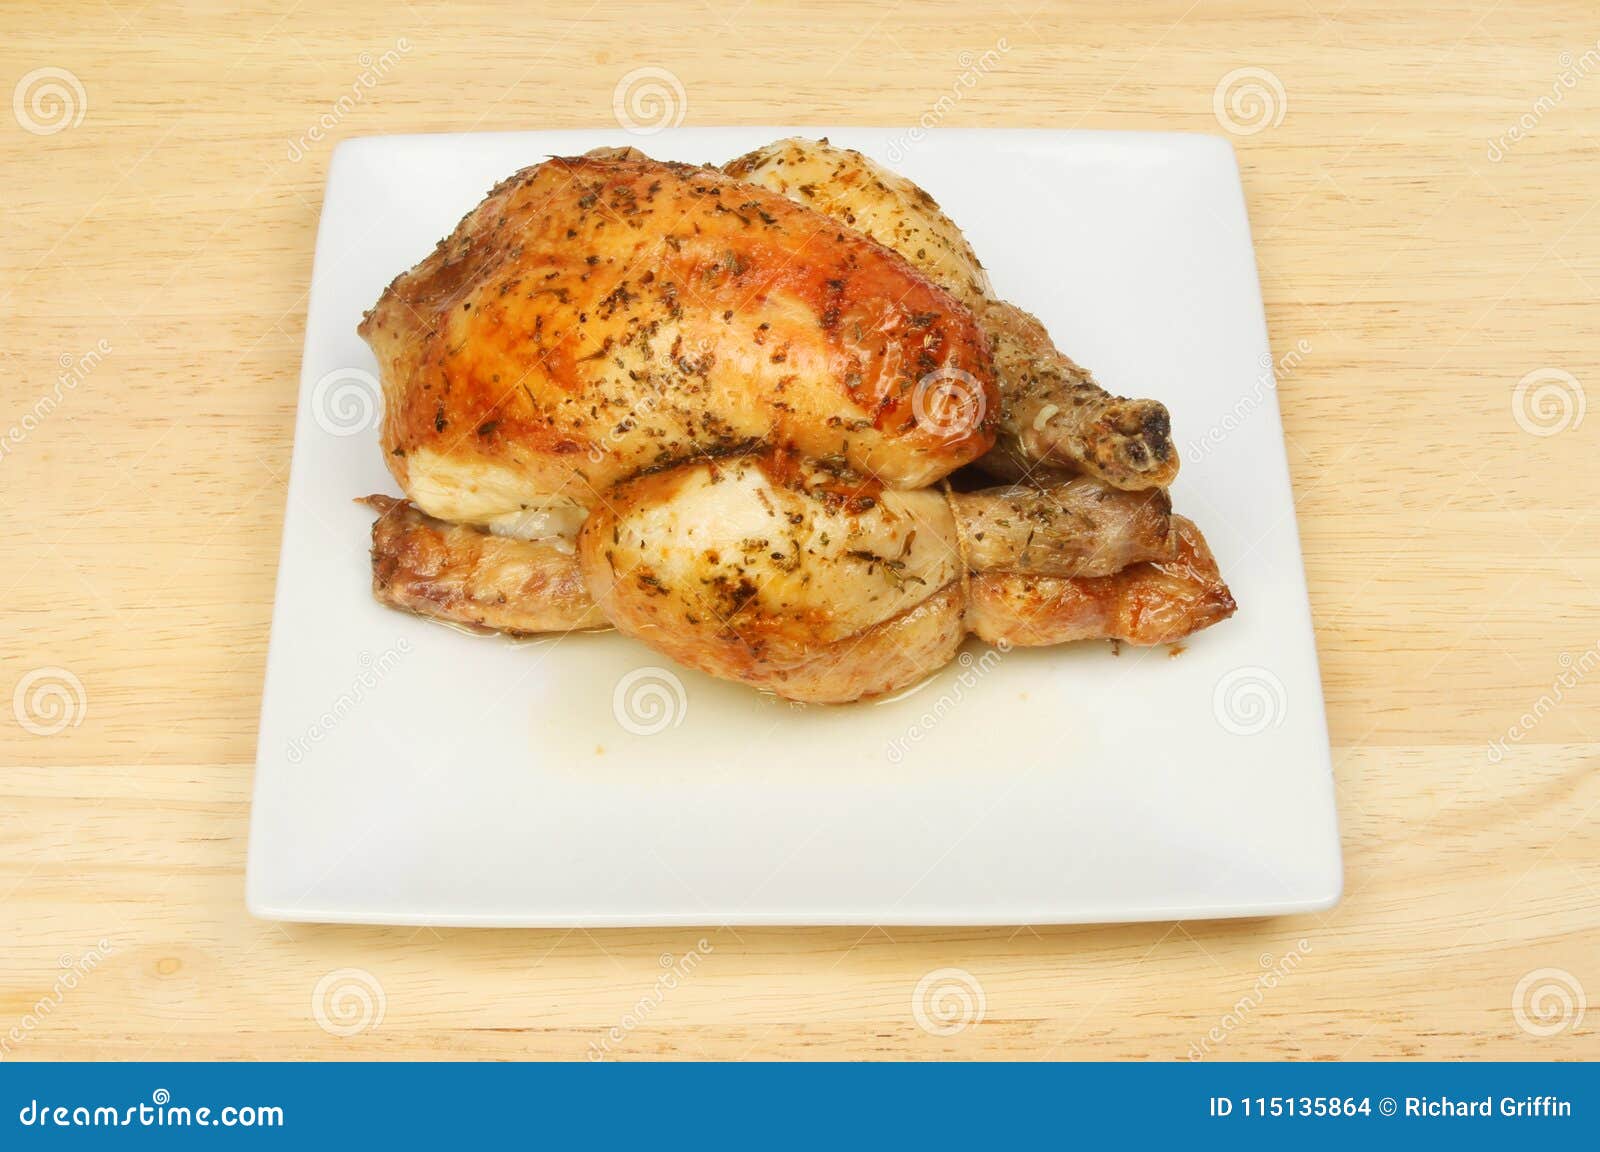 roasted poussin on a plate